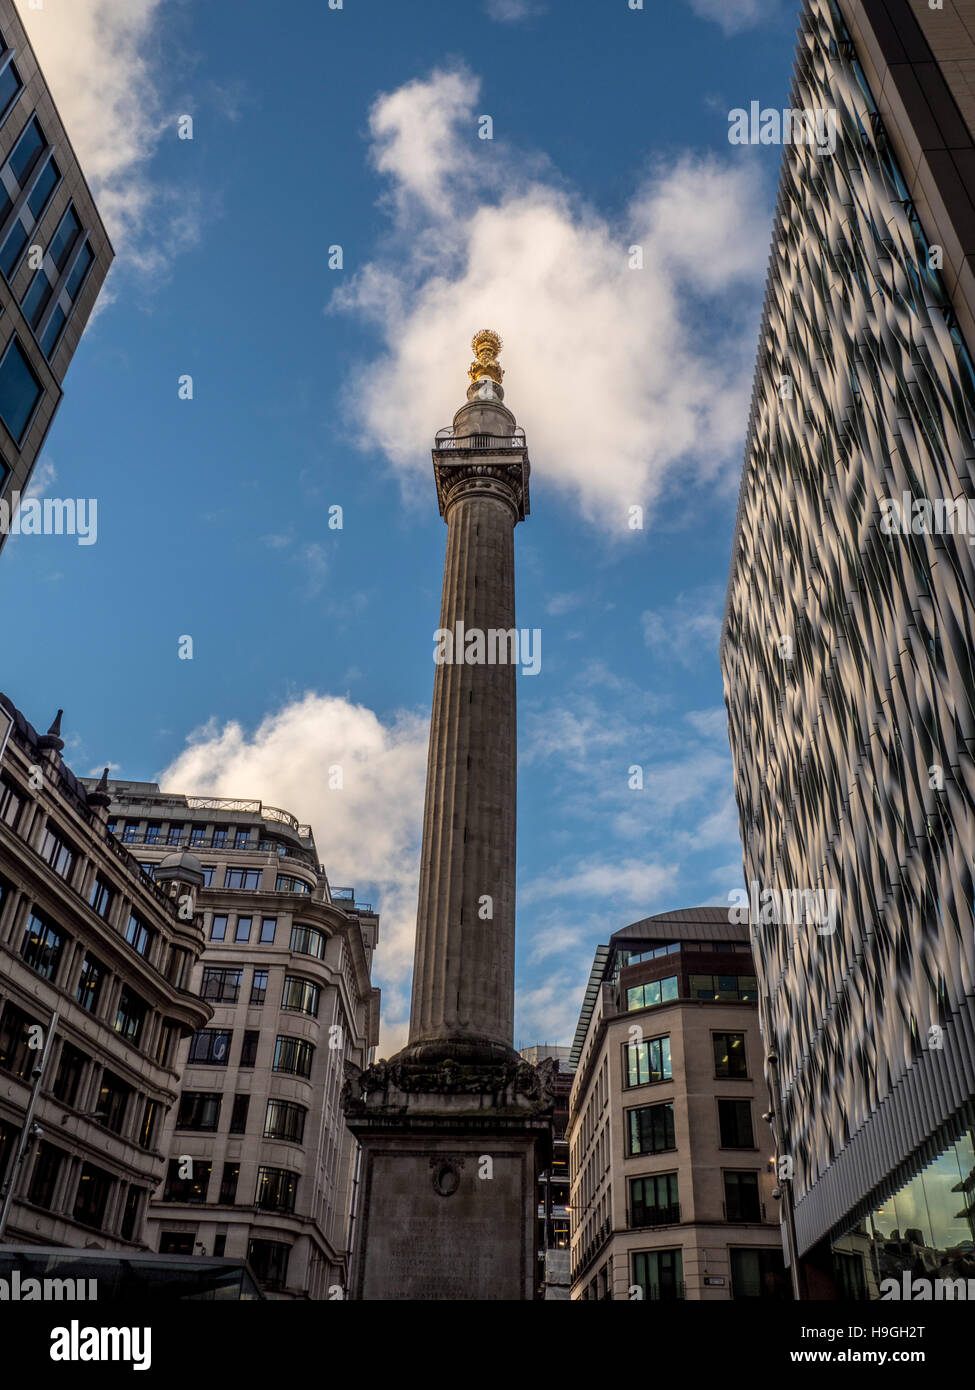 Monument to the Great fire of London by Sir Christopher Wren, London, UK. Stock Photo